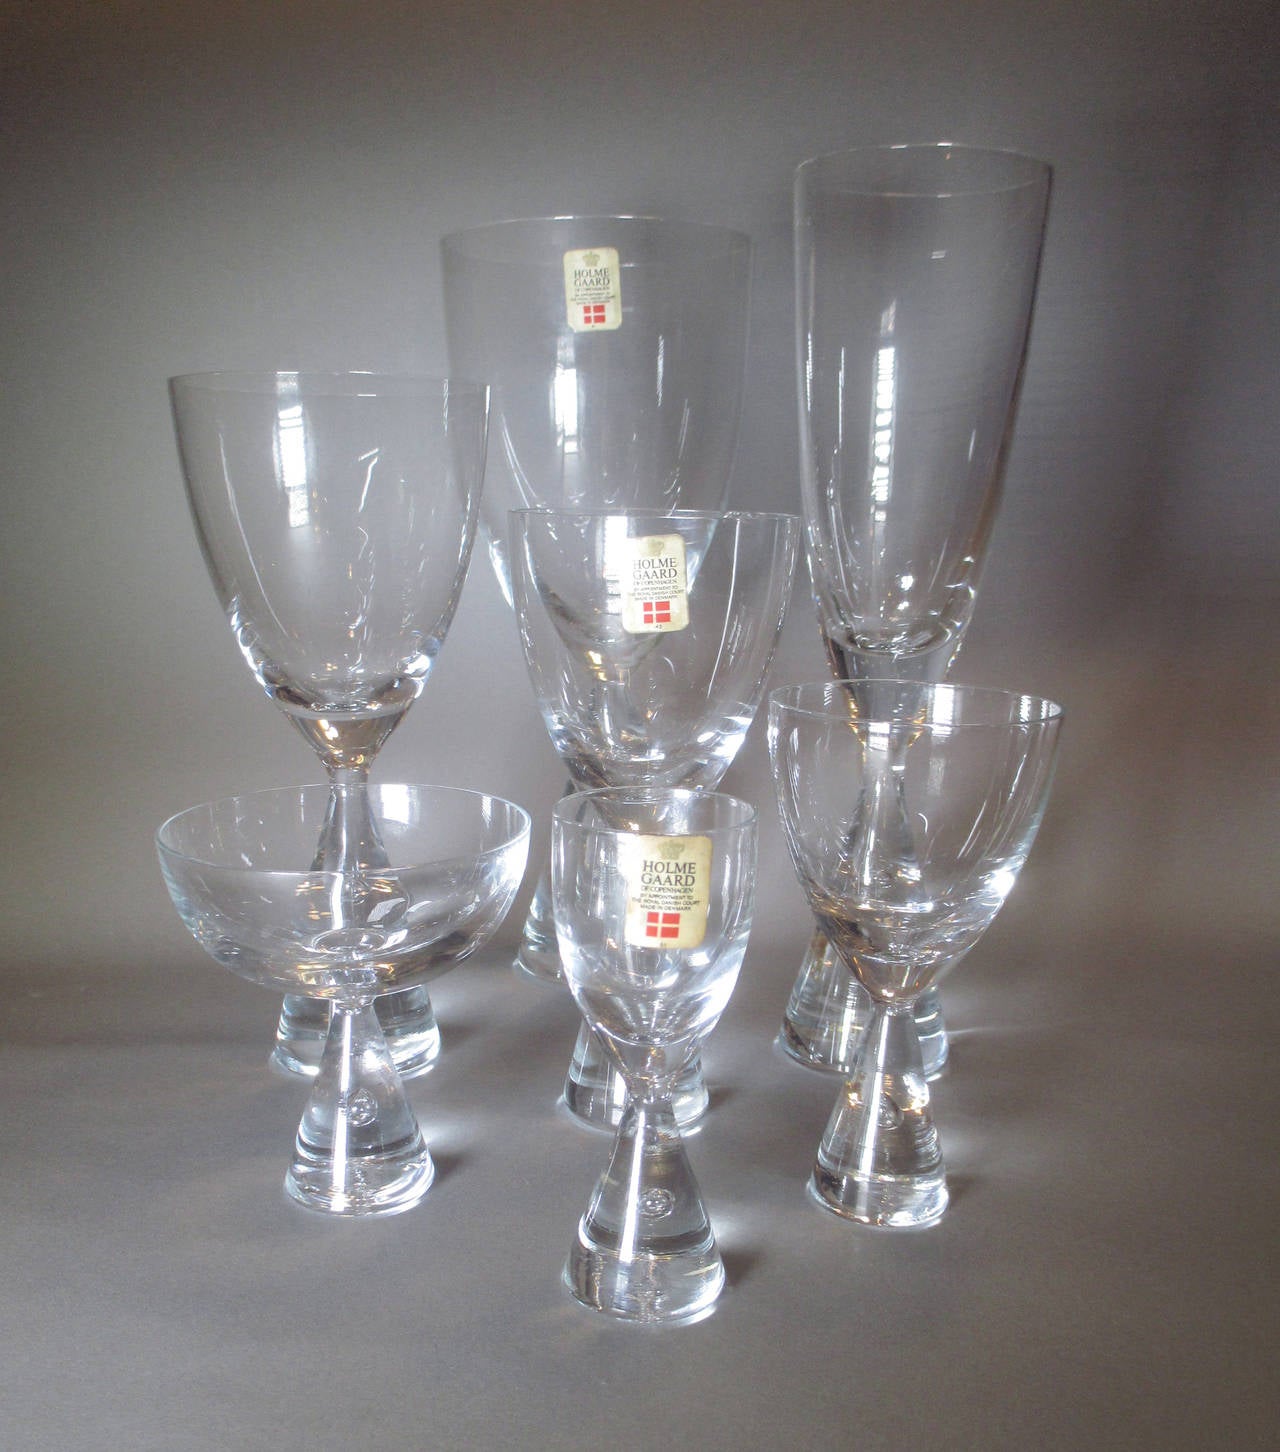 A set of 24 glasses from Denmark's glasshouse Holmegaard. This is the 